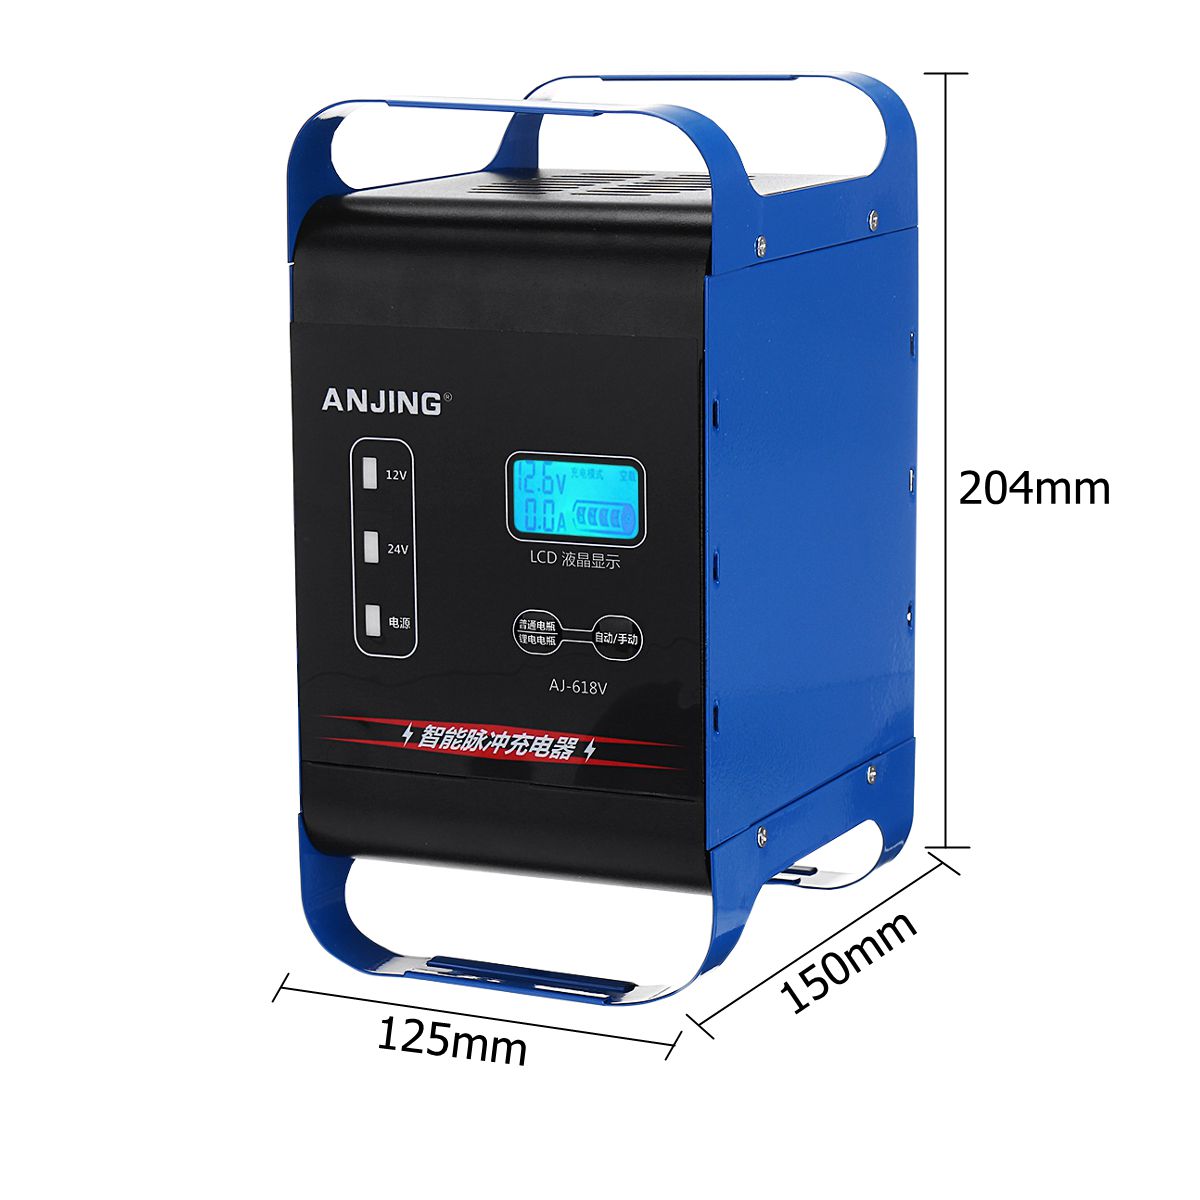 Full Automatic Car Battery Charger 12V/24V 400W Smart Fast Power Charging Suitable For Car Motorcycle EU US Plug dropship